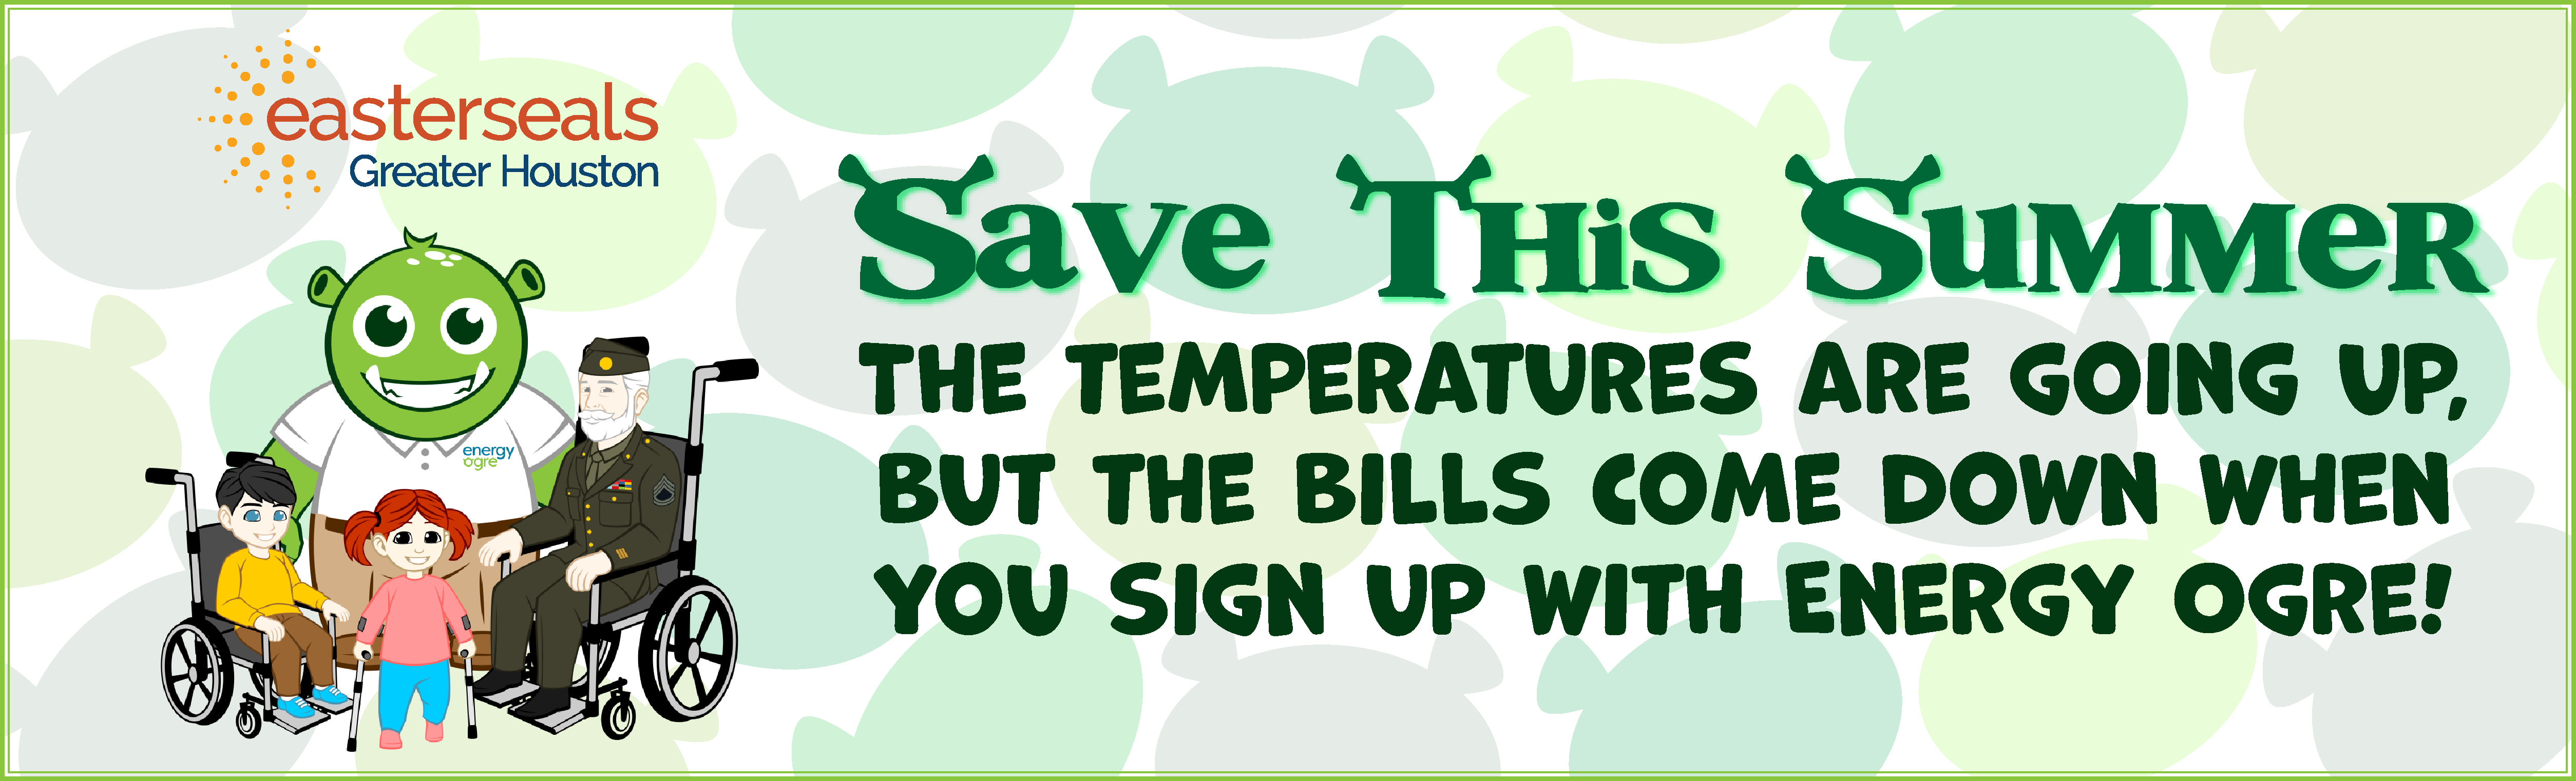 Save on your energy bills this Summer when you sign up with Energy Ogre